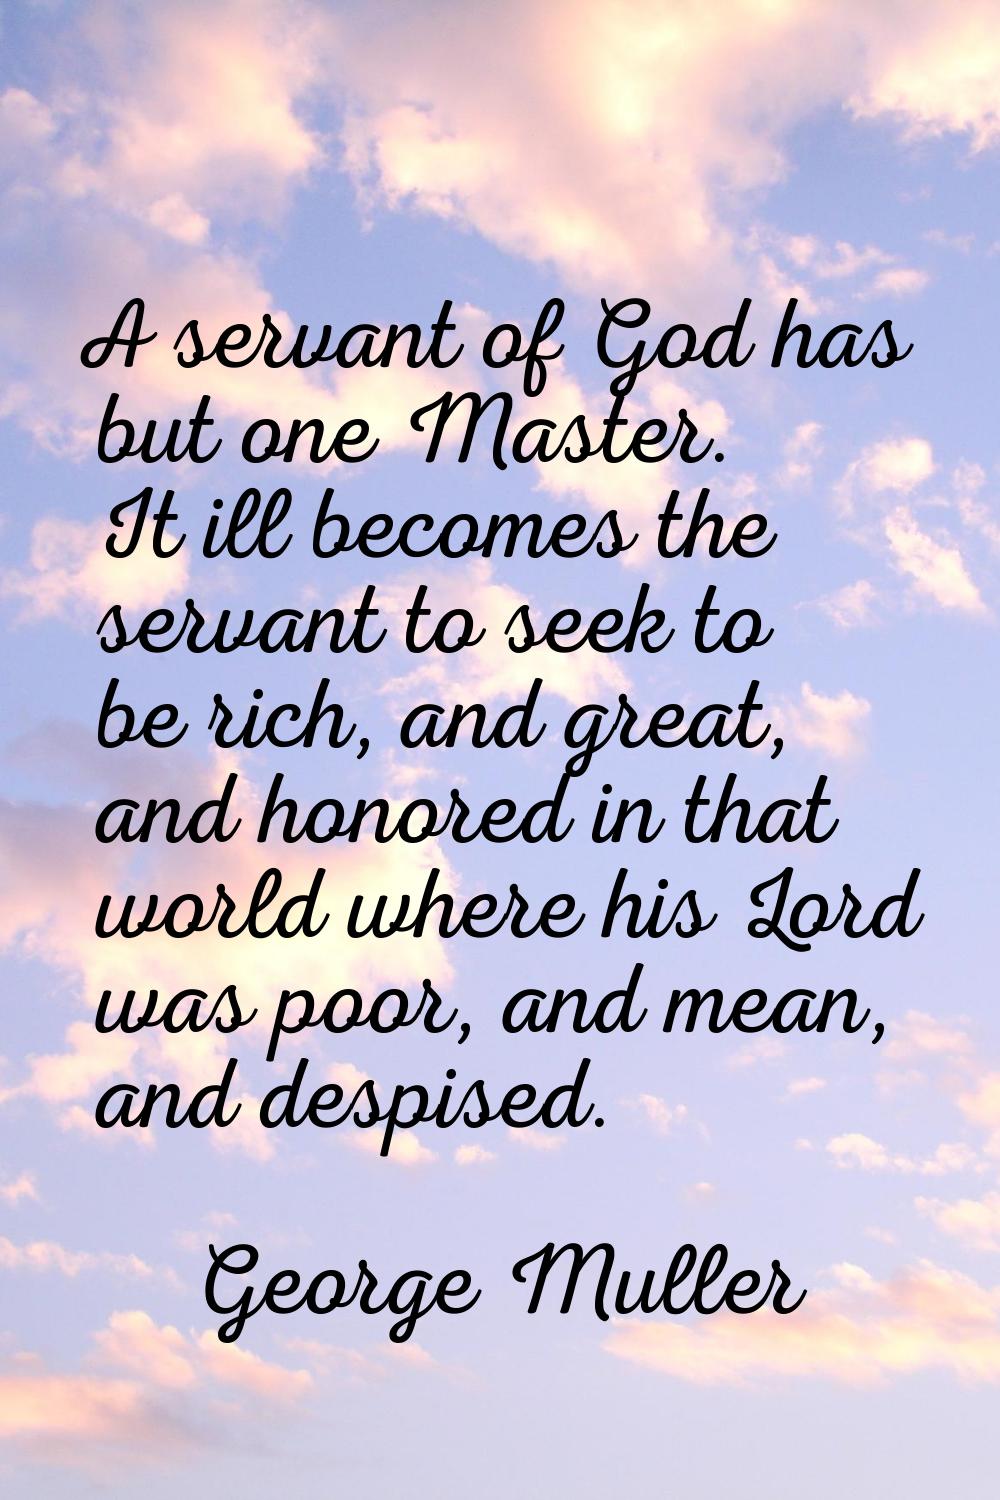 A servant of God has but one Master. It ill becomes the servant to seek to be rich, and great, and 